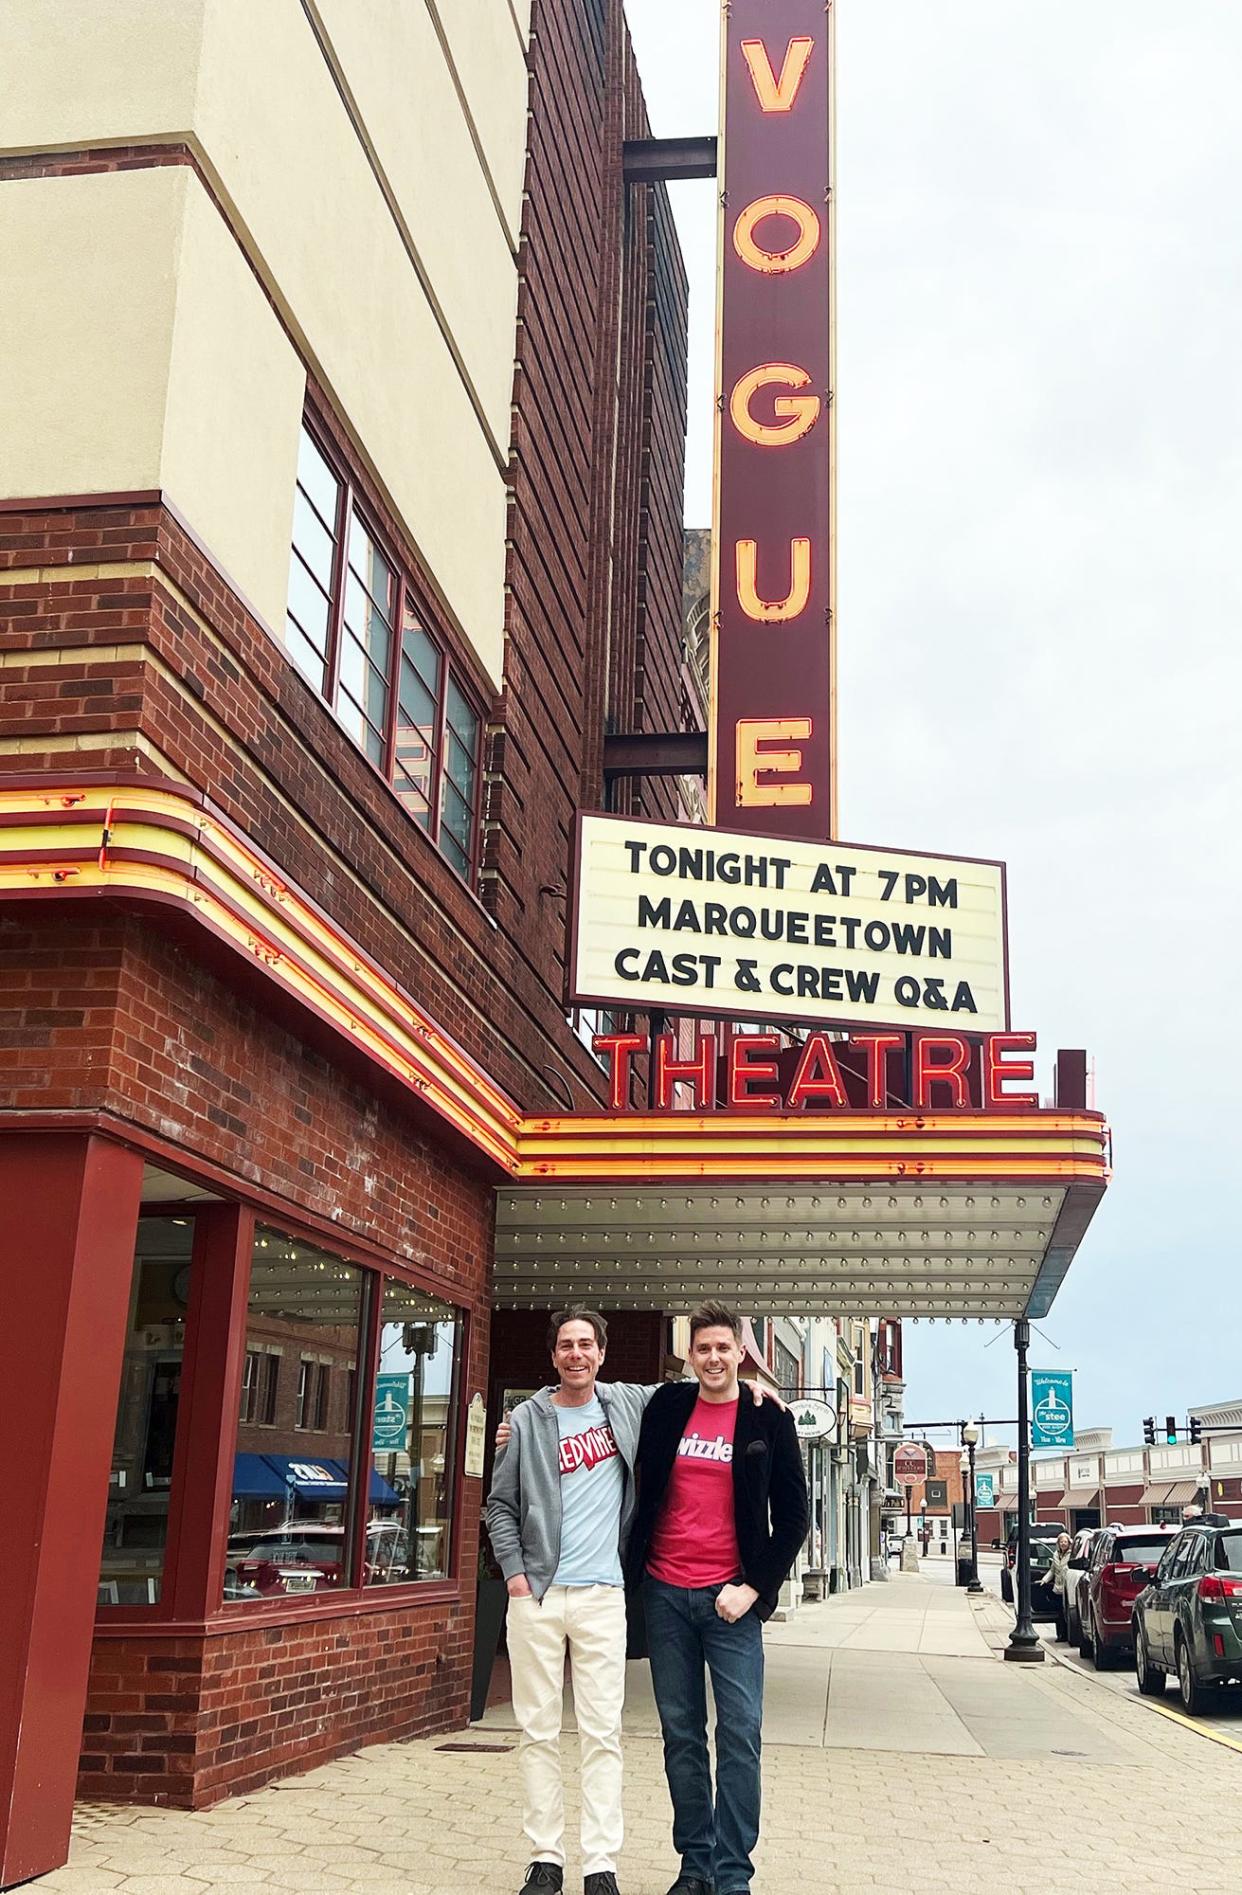 Filmmakers Joseph Beyer, left, and Jordan Anderson outside the Vogue Theatre in Manistee for a screening of their documentary "Marqueetown."